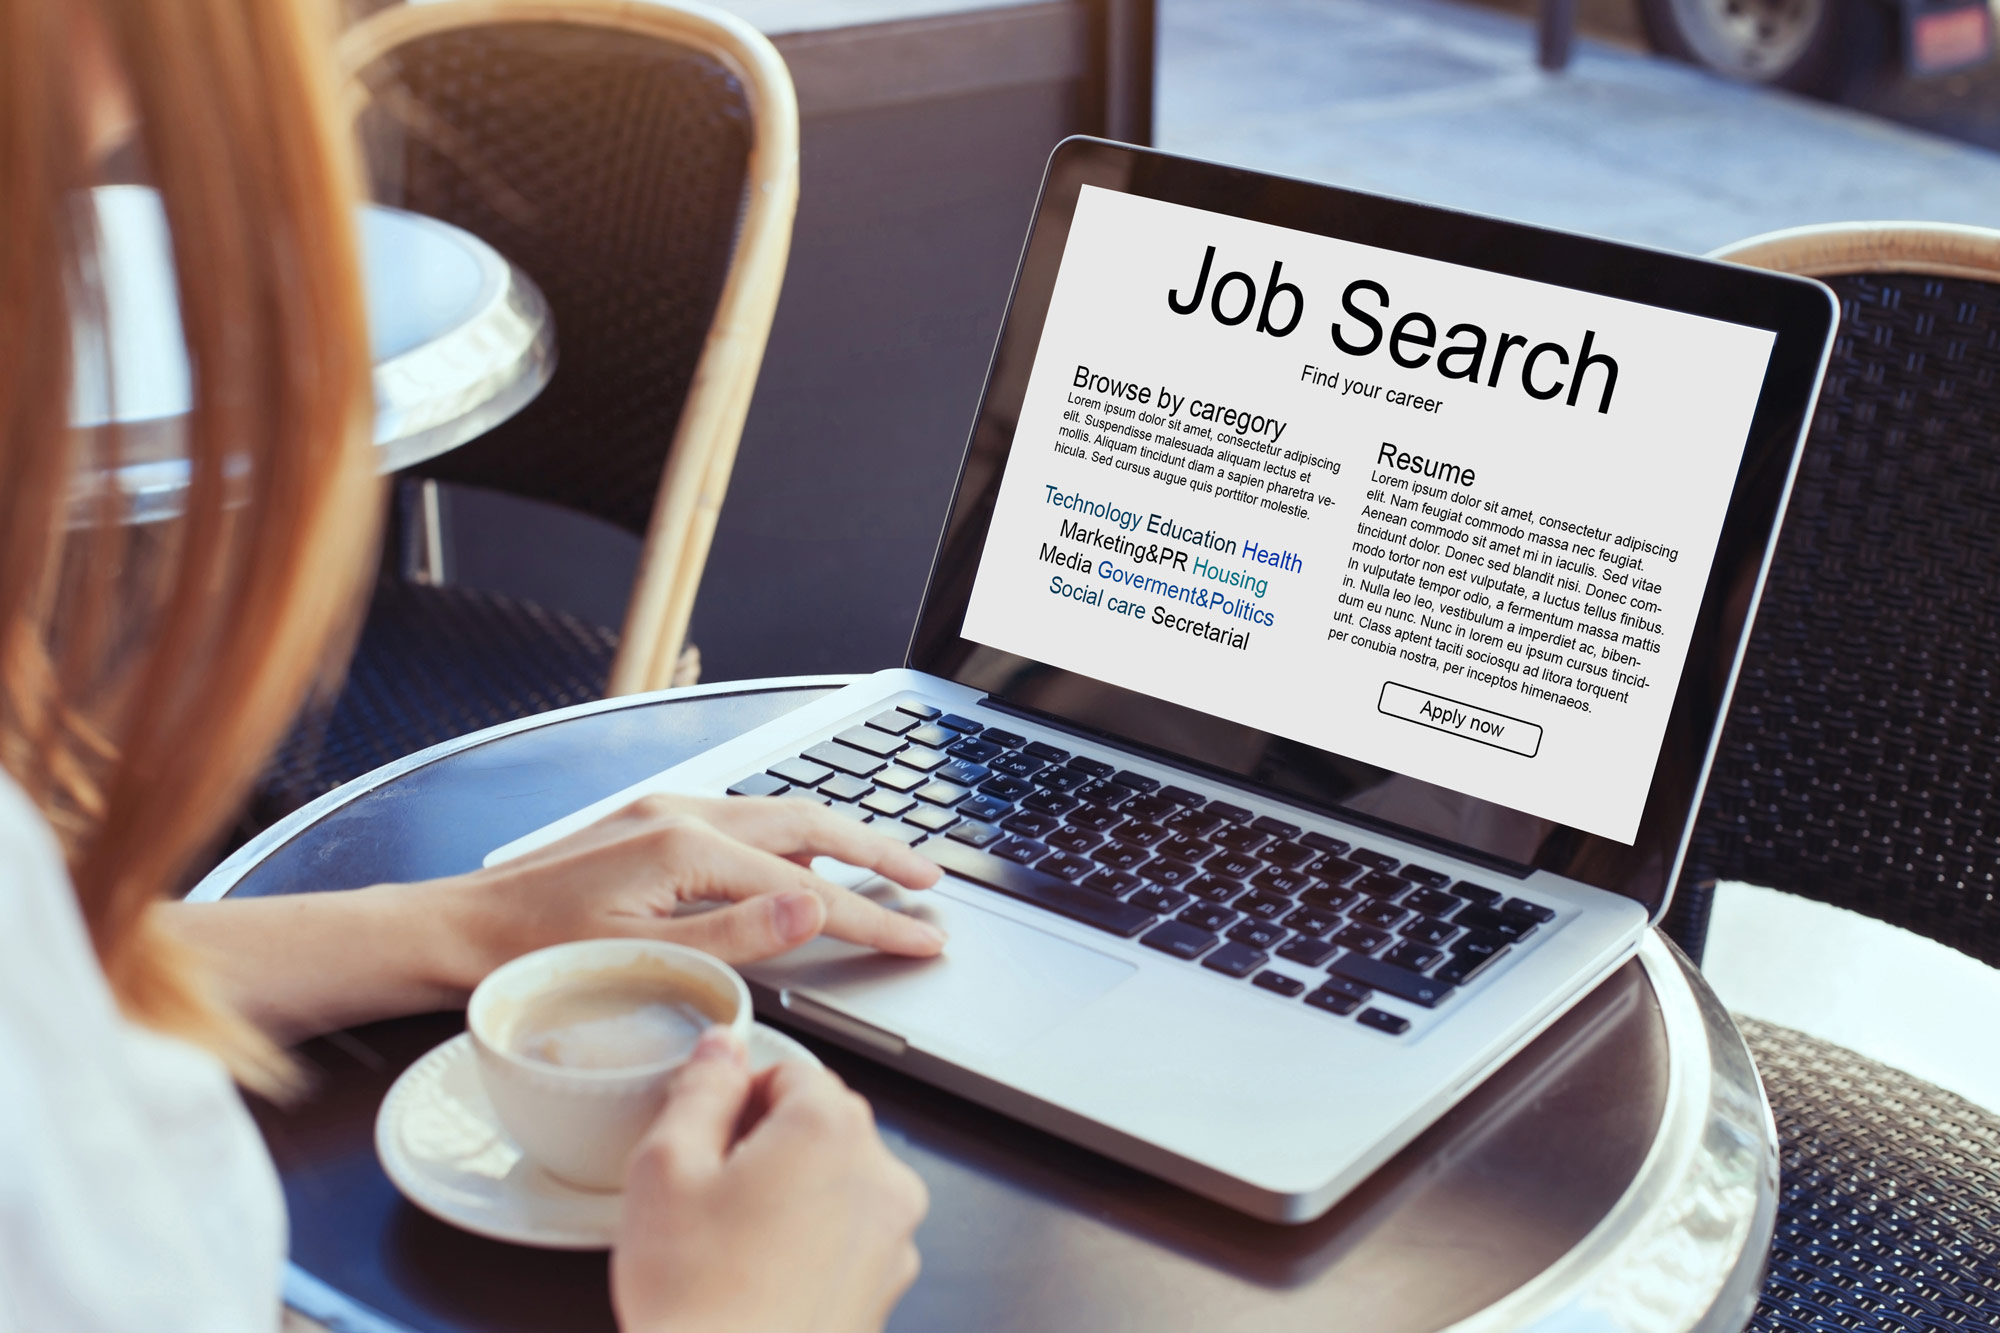 Image of person on computer searching for a job